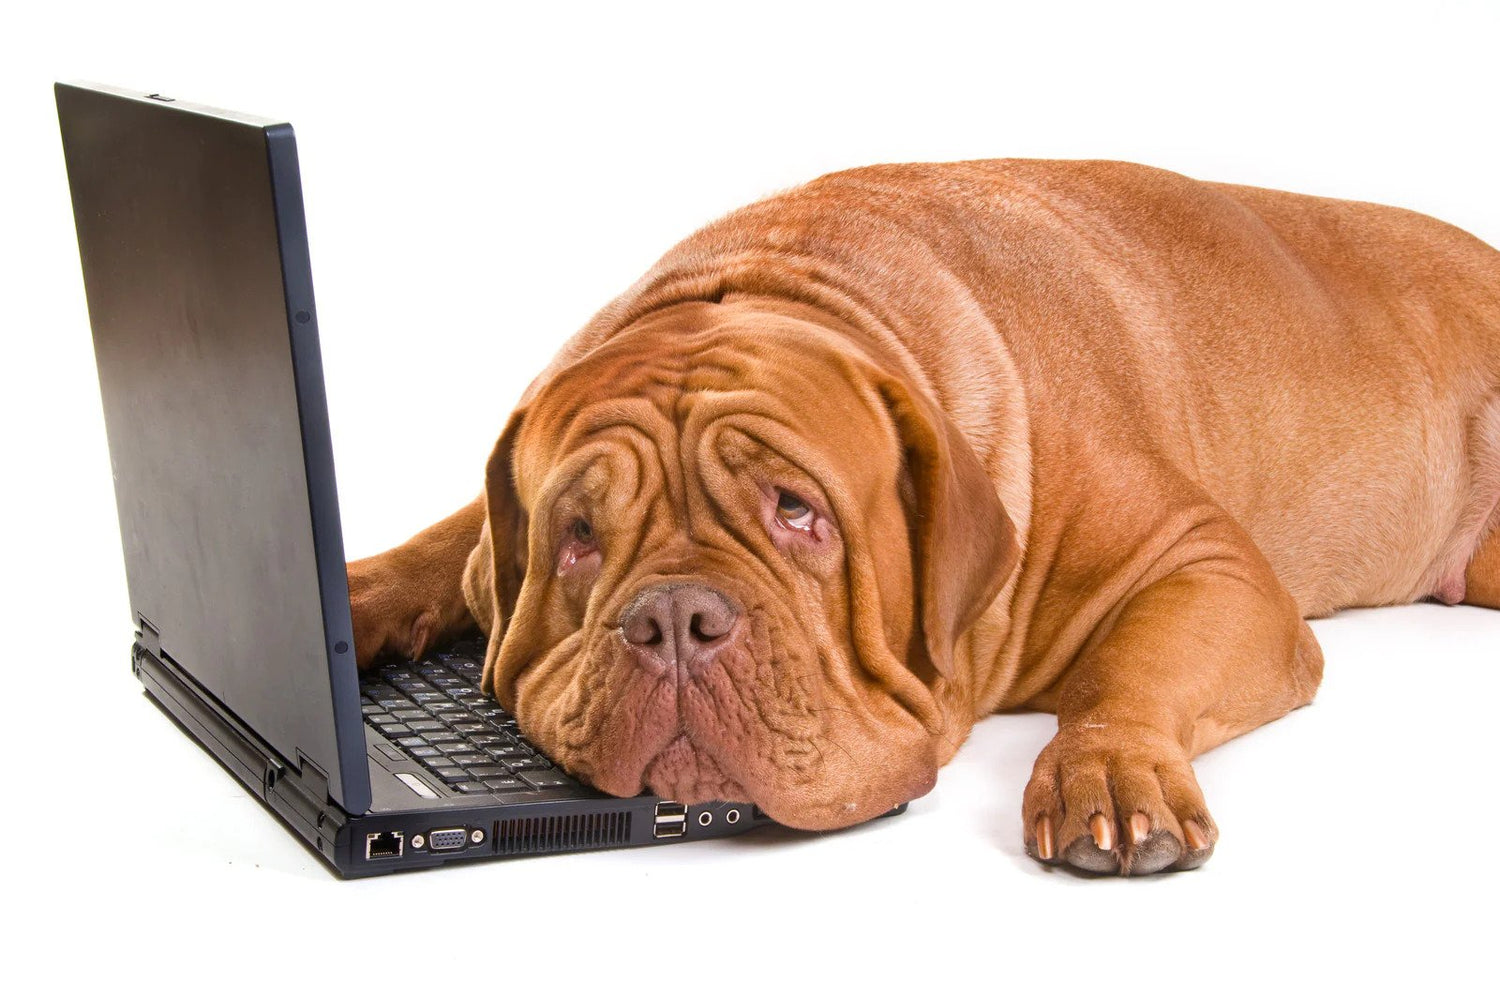 A Dog laying on the laptop with the disappointment on 404 page not found error